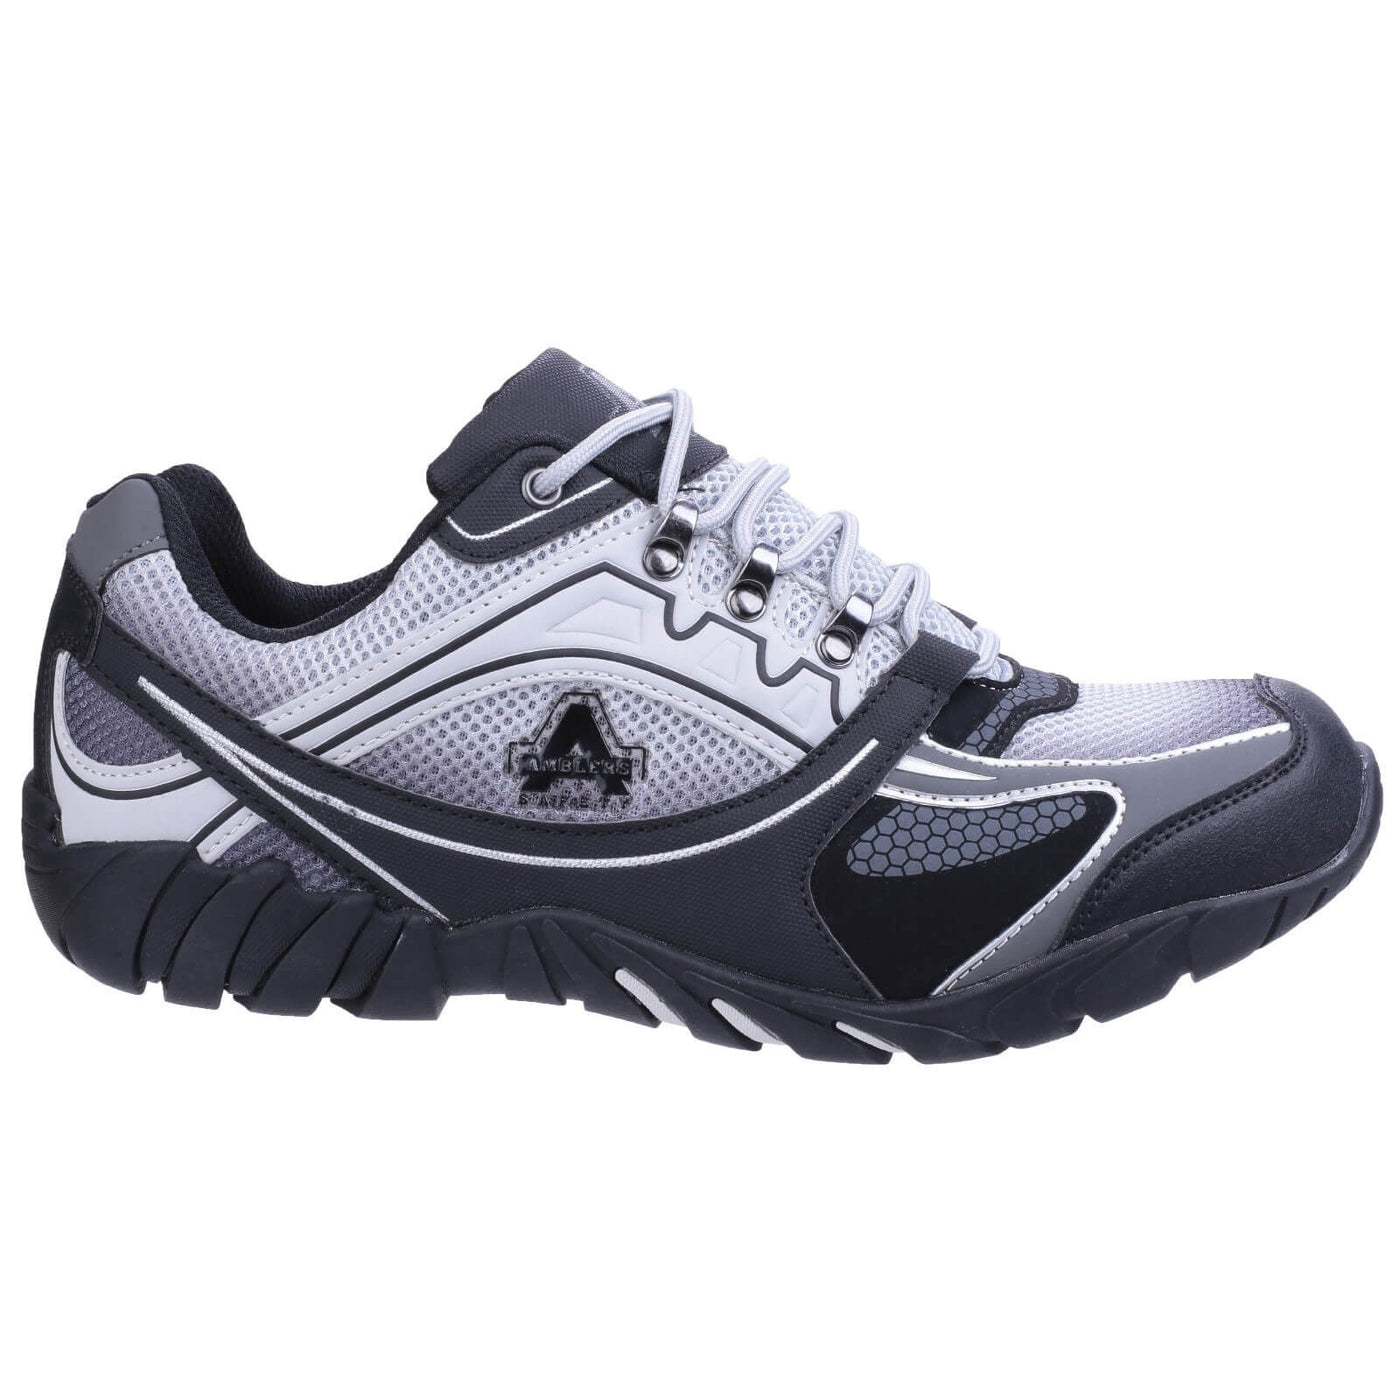 Amblers FS702 Granite Vegan Anti-static Lace-up Safety Trainers Grey 5#colour_grey